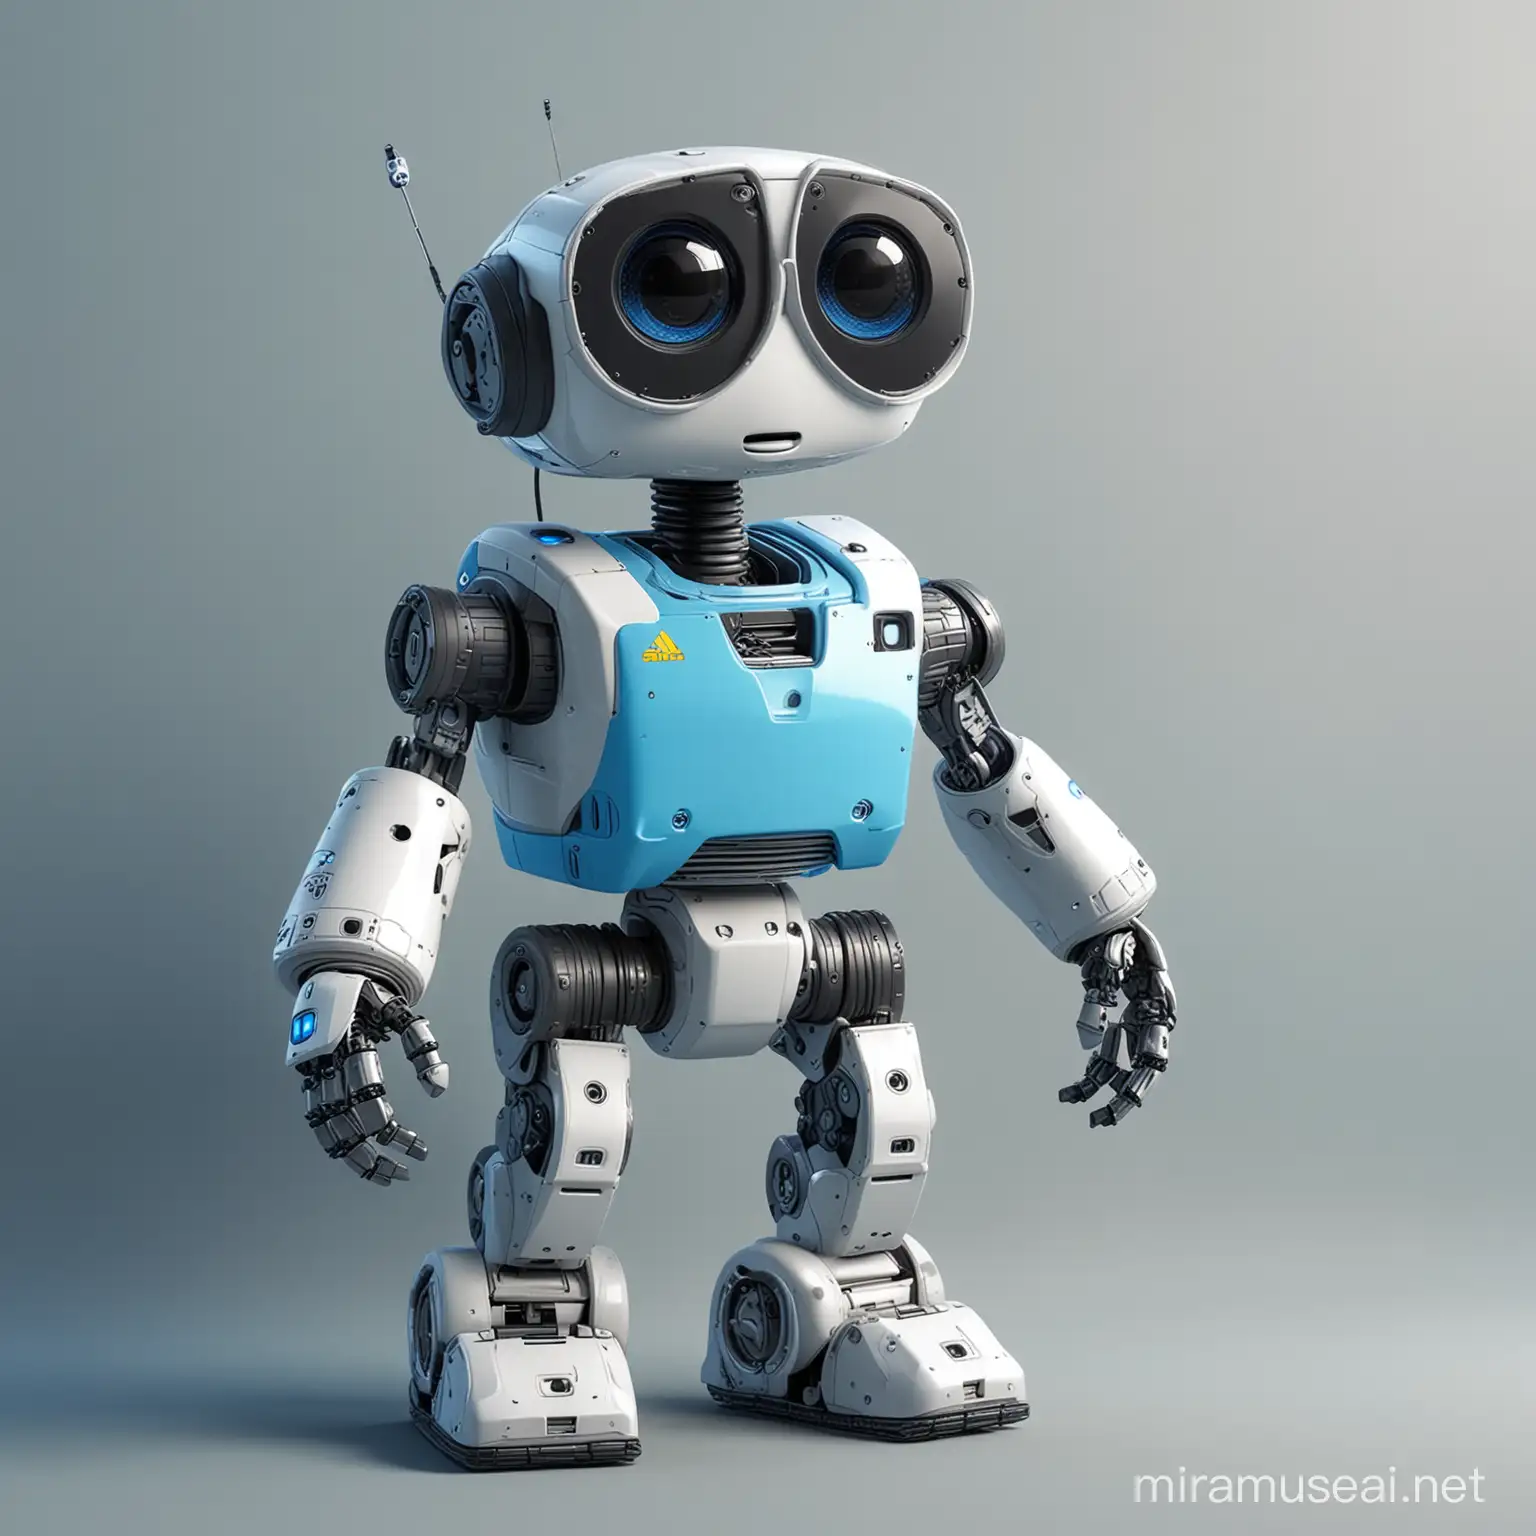 3d realistic Digital mascot similar like Eva robot in Wall-e movie. use accent sky blue tone for highlights